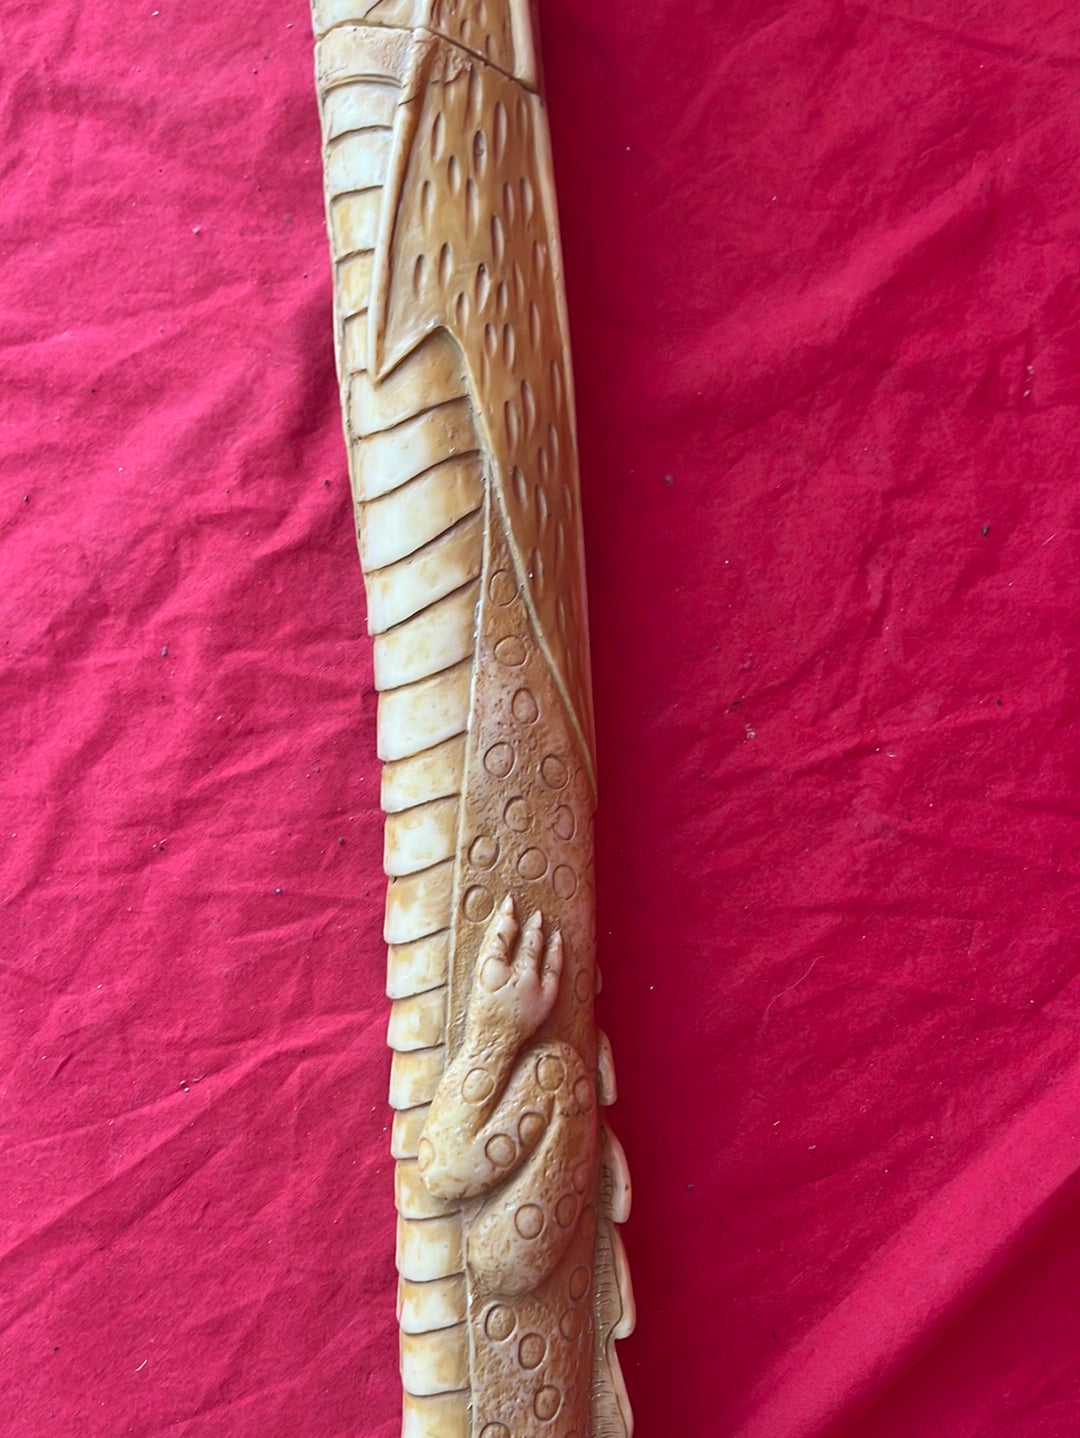 Dragon Sword with Carved Resin Handle and Sheath